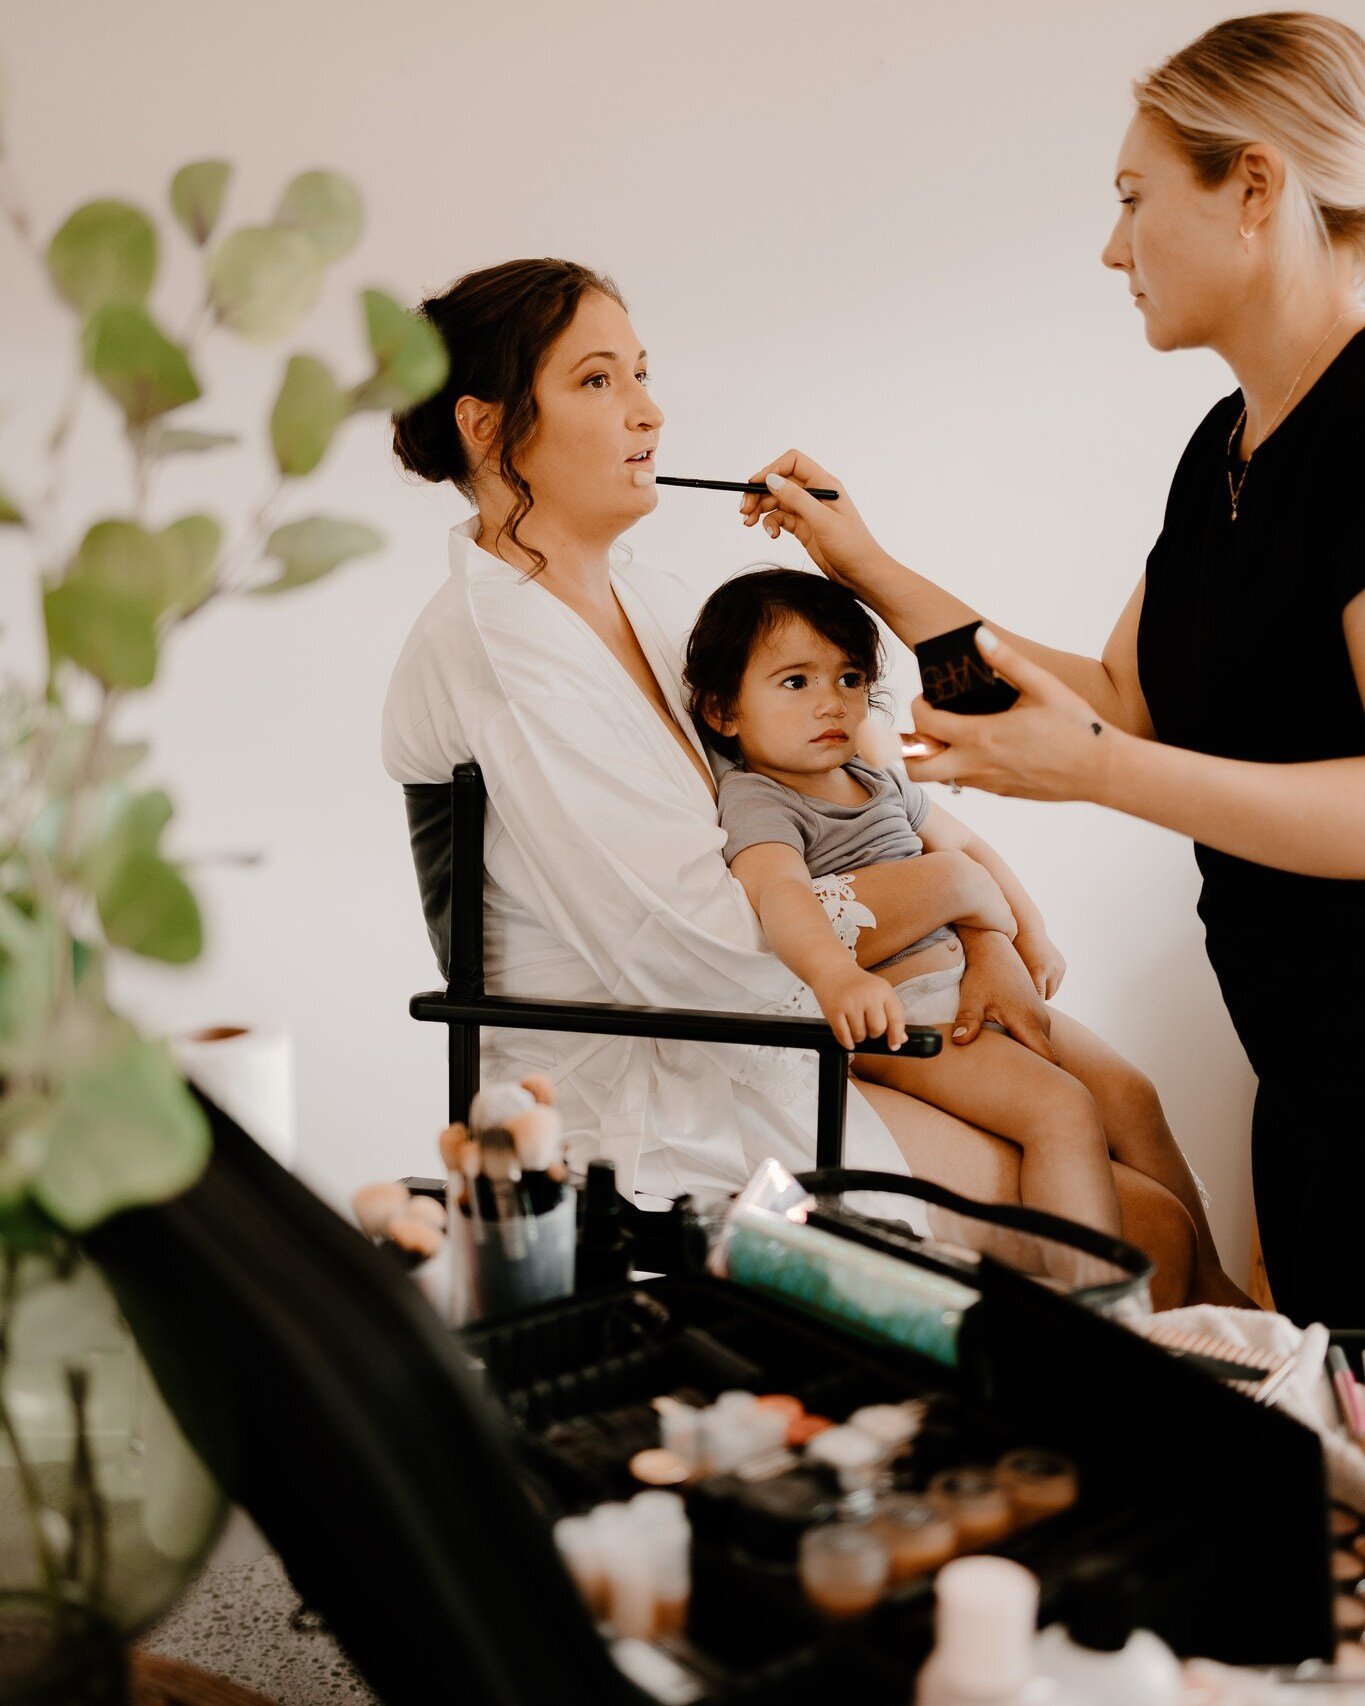 It's either calm or chaos with the little ones around but they make cute photos 🤷&zwj;♀️ 😂

📷 - @sallyannephotography 

#makeupartistnz #chchmua #christchurchnz #christchurchmua  #nzmua #nzmakeupartist #nzmakeup #qualifiedmua #nzmakeupartists #nzm